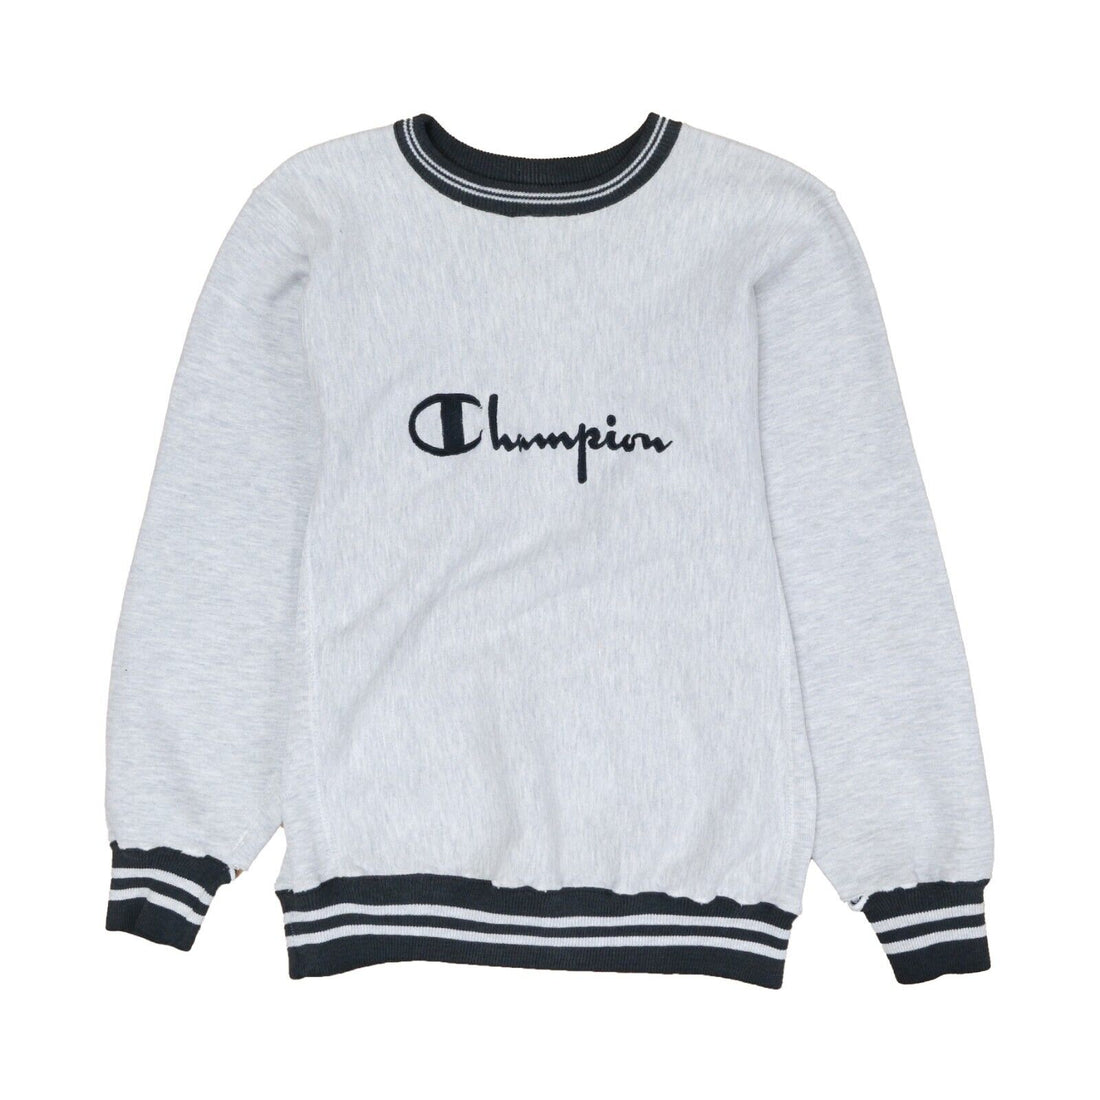 Vintage Champion Reverse Weave Spell Out Sweatshirt Size Medium Embroidered 90s